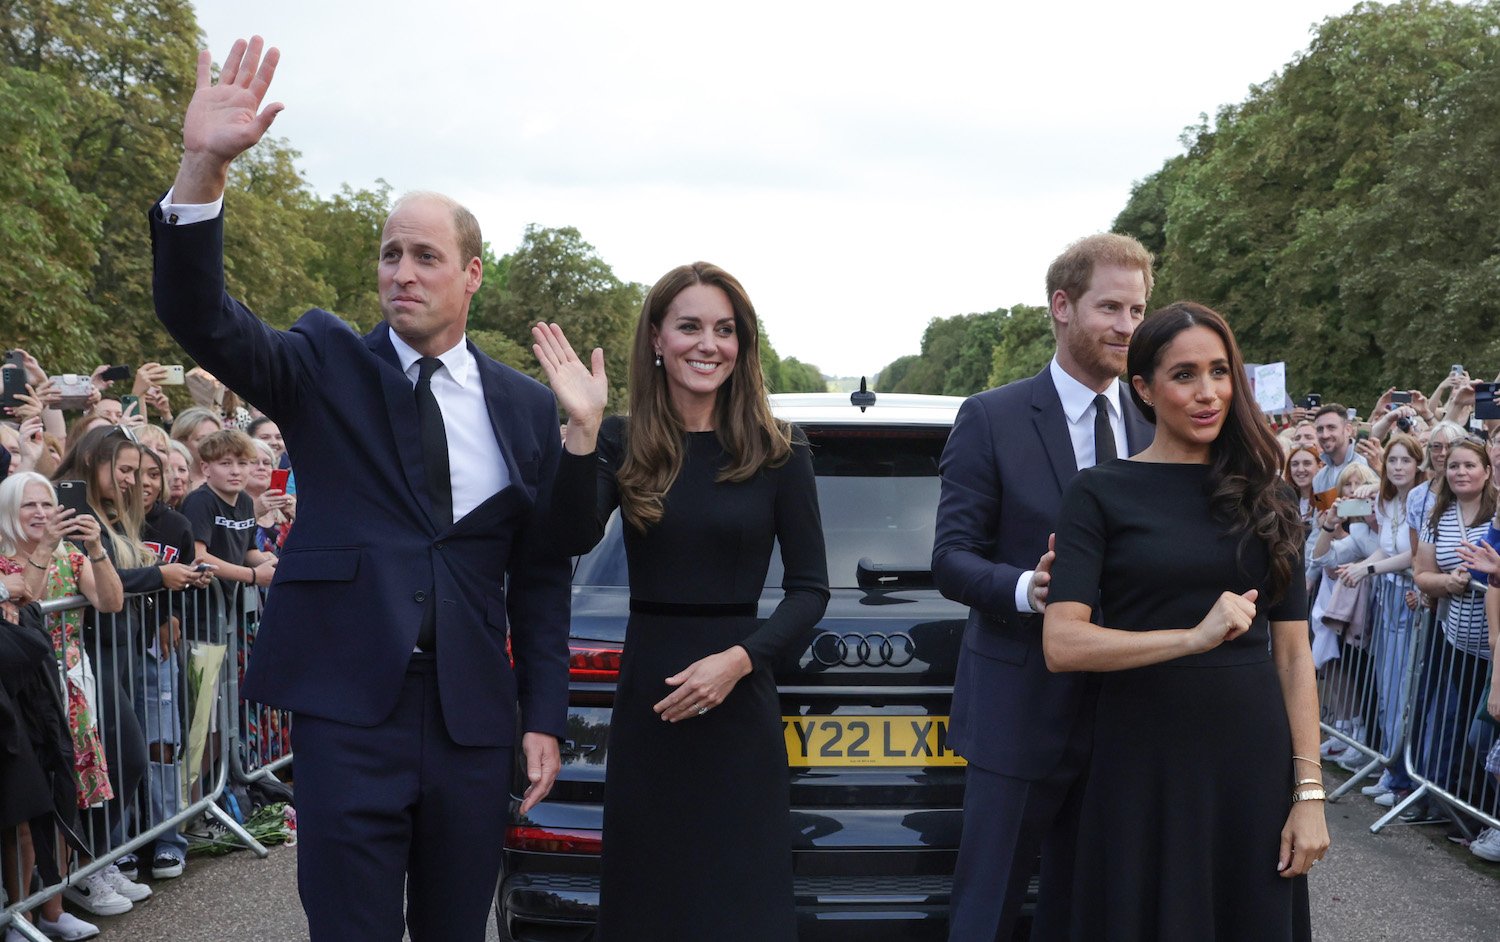 Prince William and Kate Middleton wave outside Windsor Castle after extending olive branch to Prince Harry and Meghan Markle after Queen Elizabeth's death